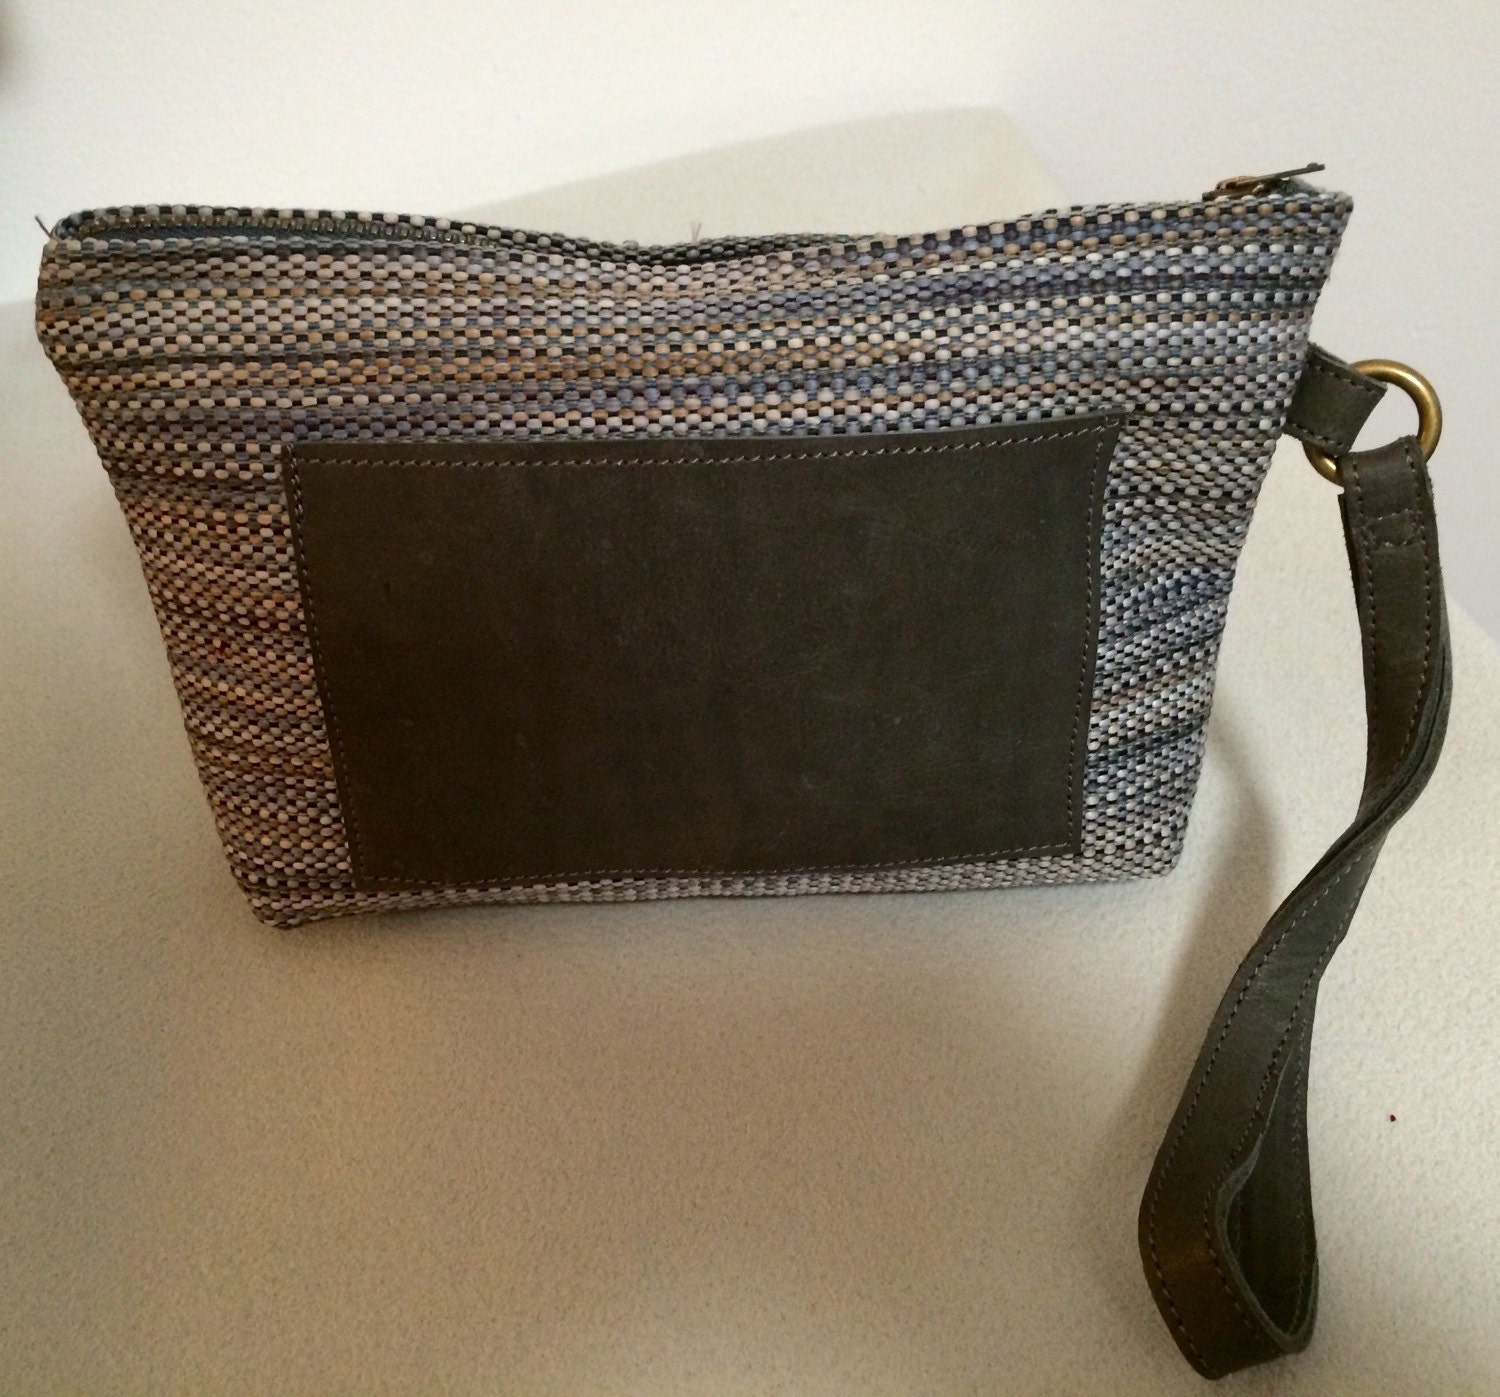 Wristlet purse-leather by JAlcanciaDesign on Etsy